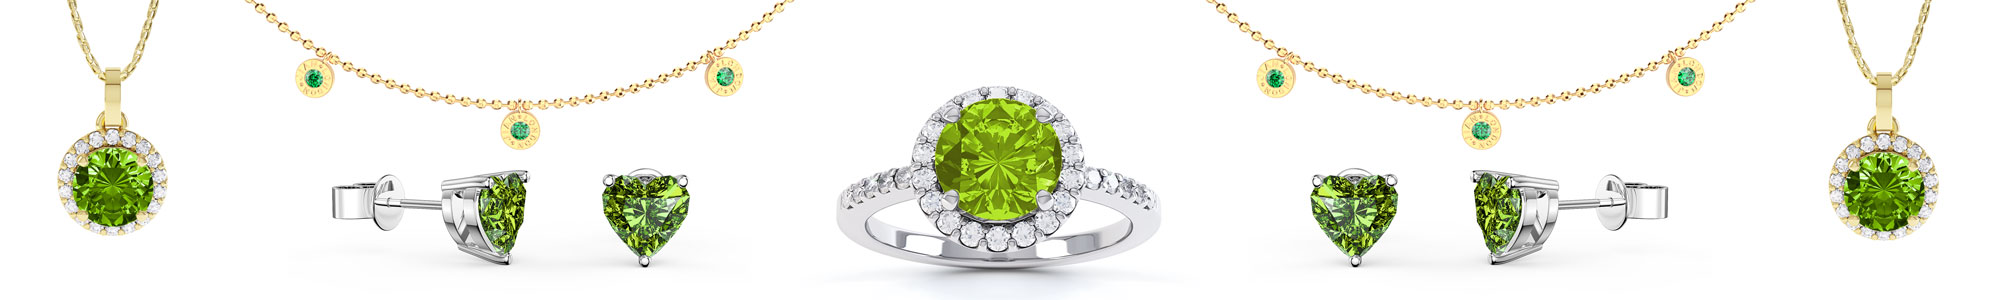 Peridot Jewellery - from Earrings studs and drops to Pendants to Engagement Rings